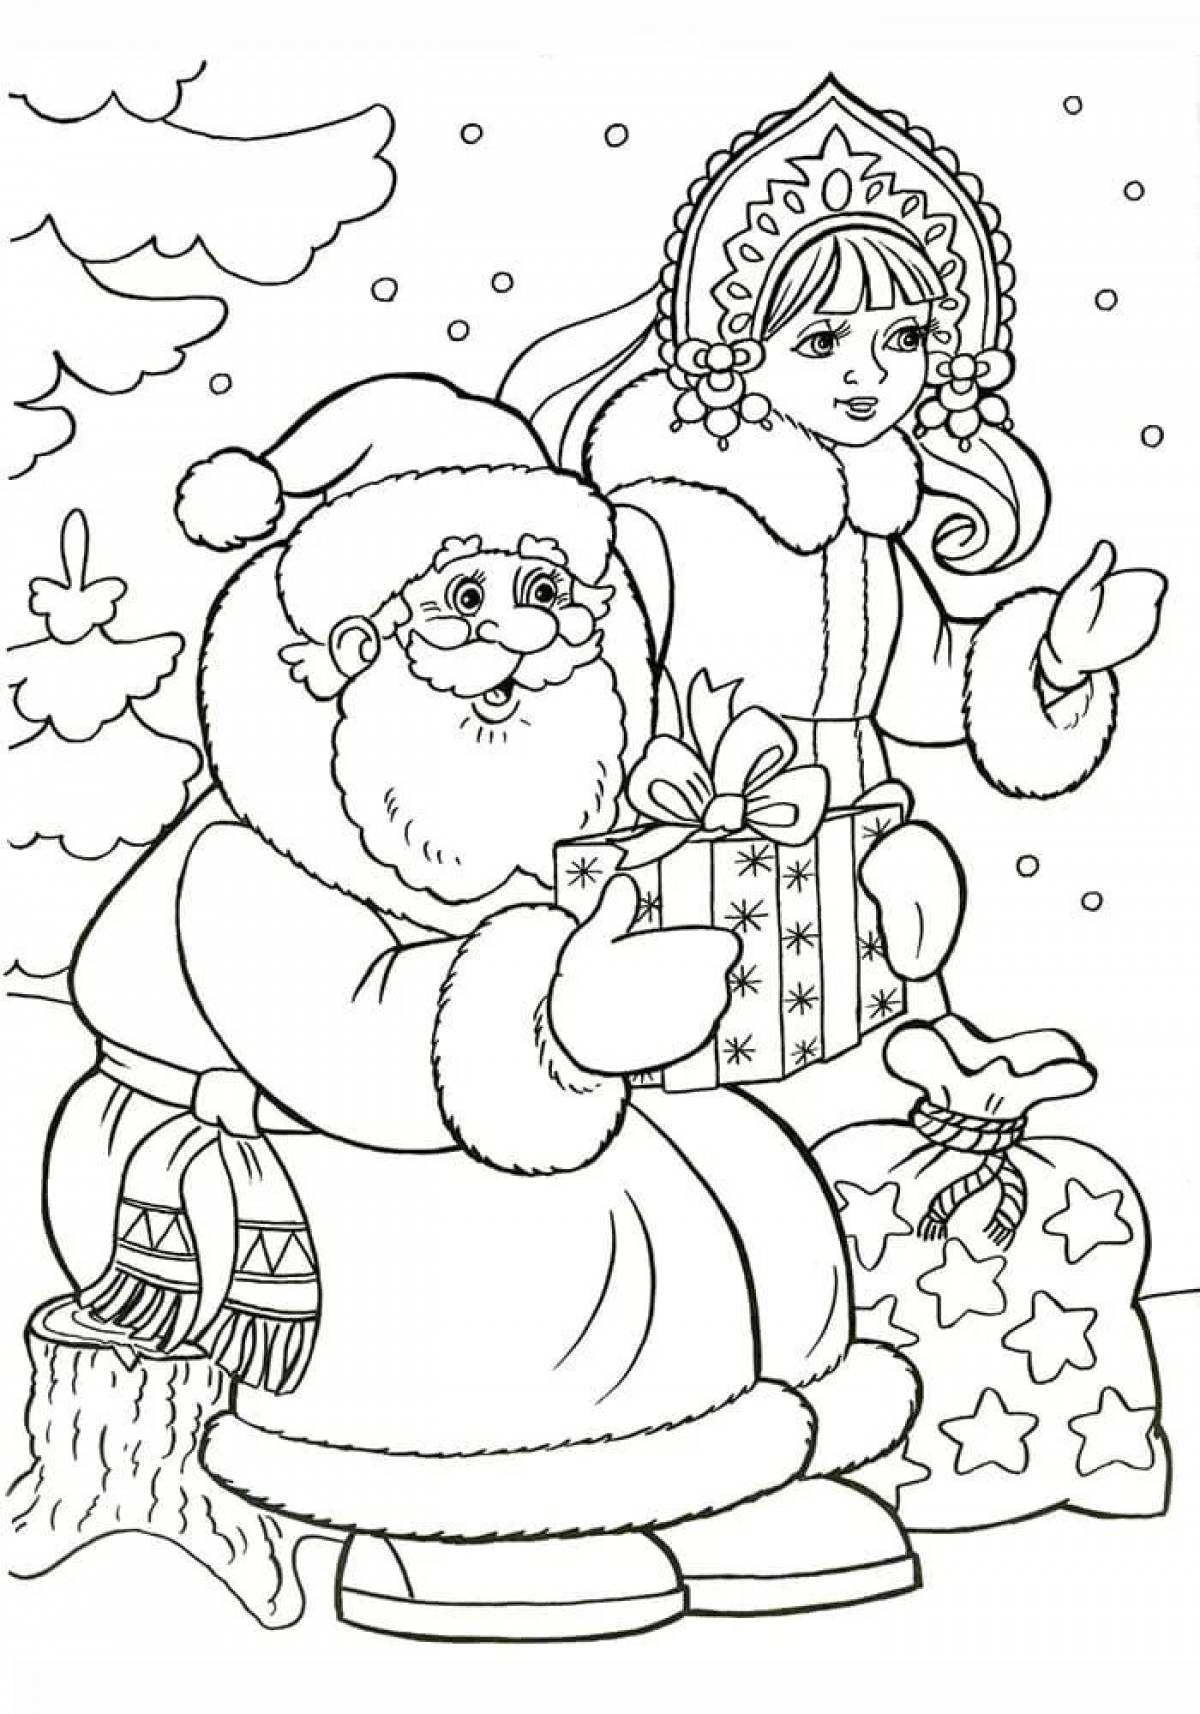 Santa Claus and Snow Maiden drawing #11